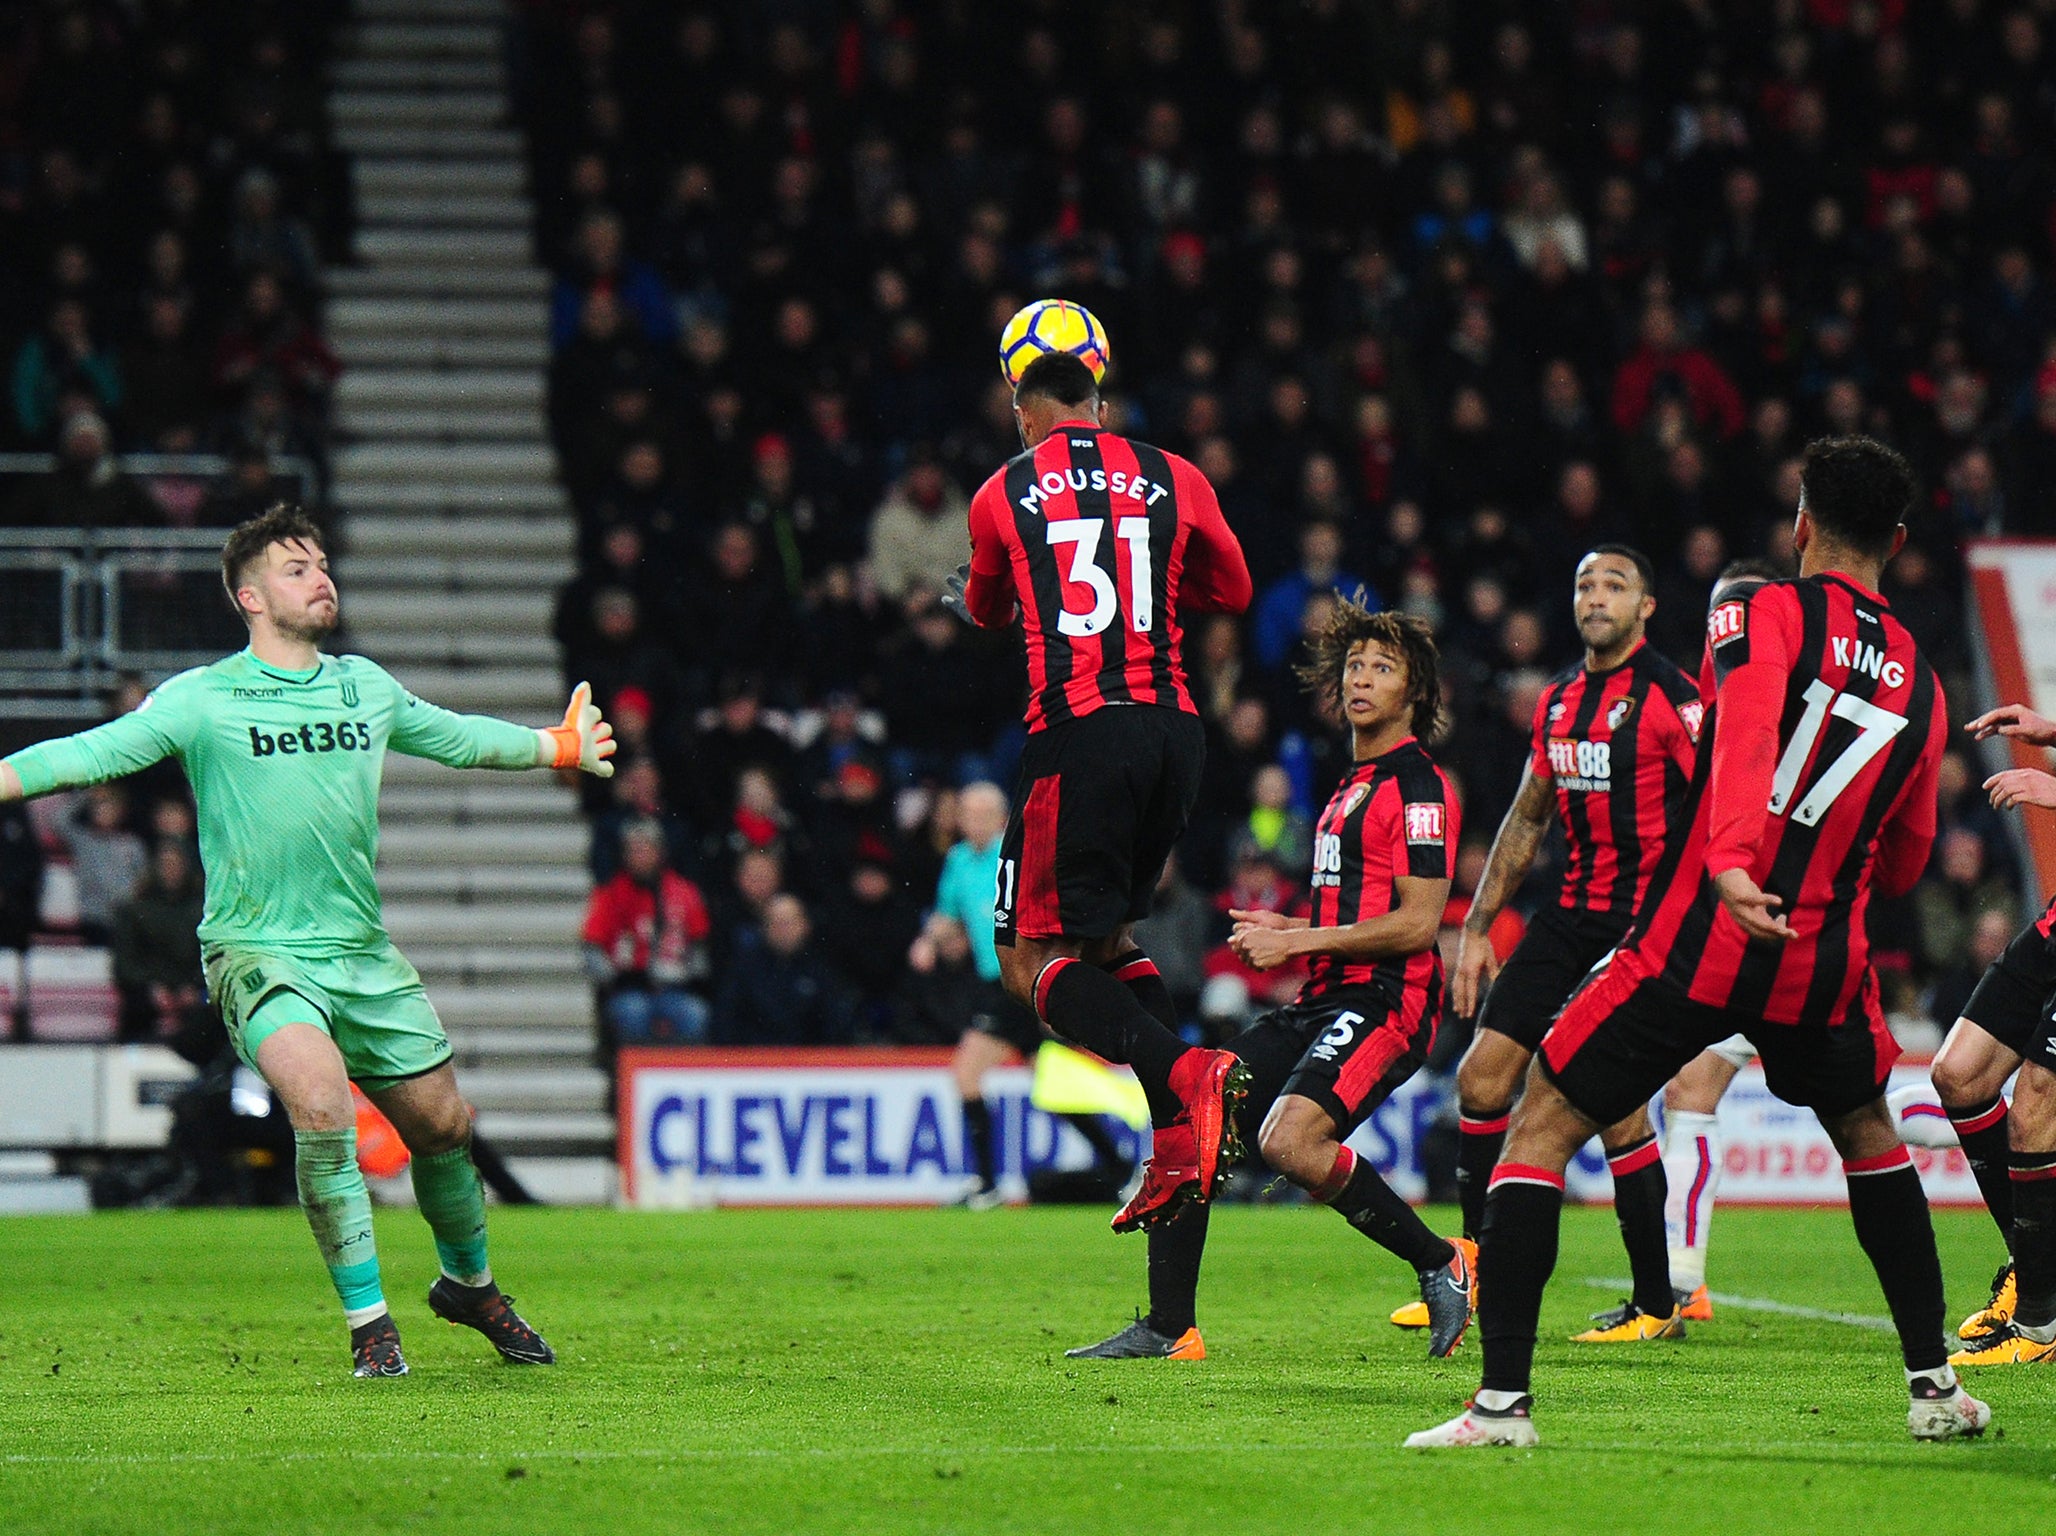 Bournemouth snatched all three points